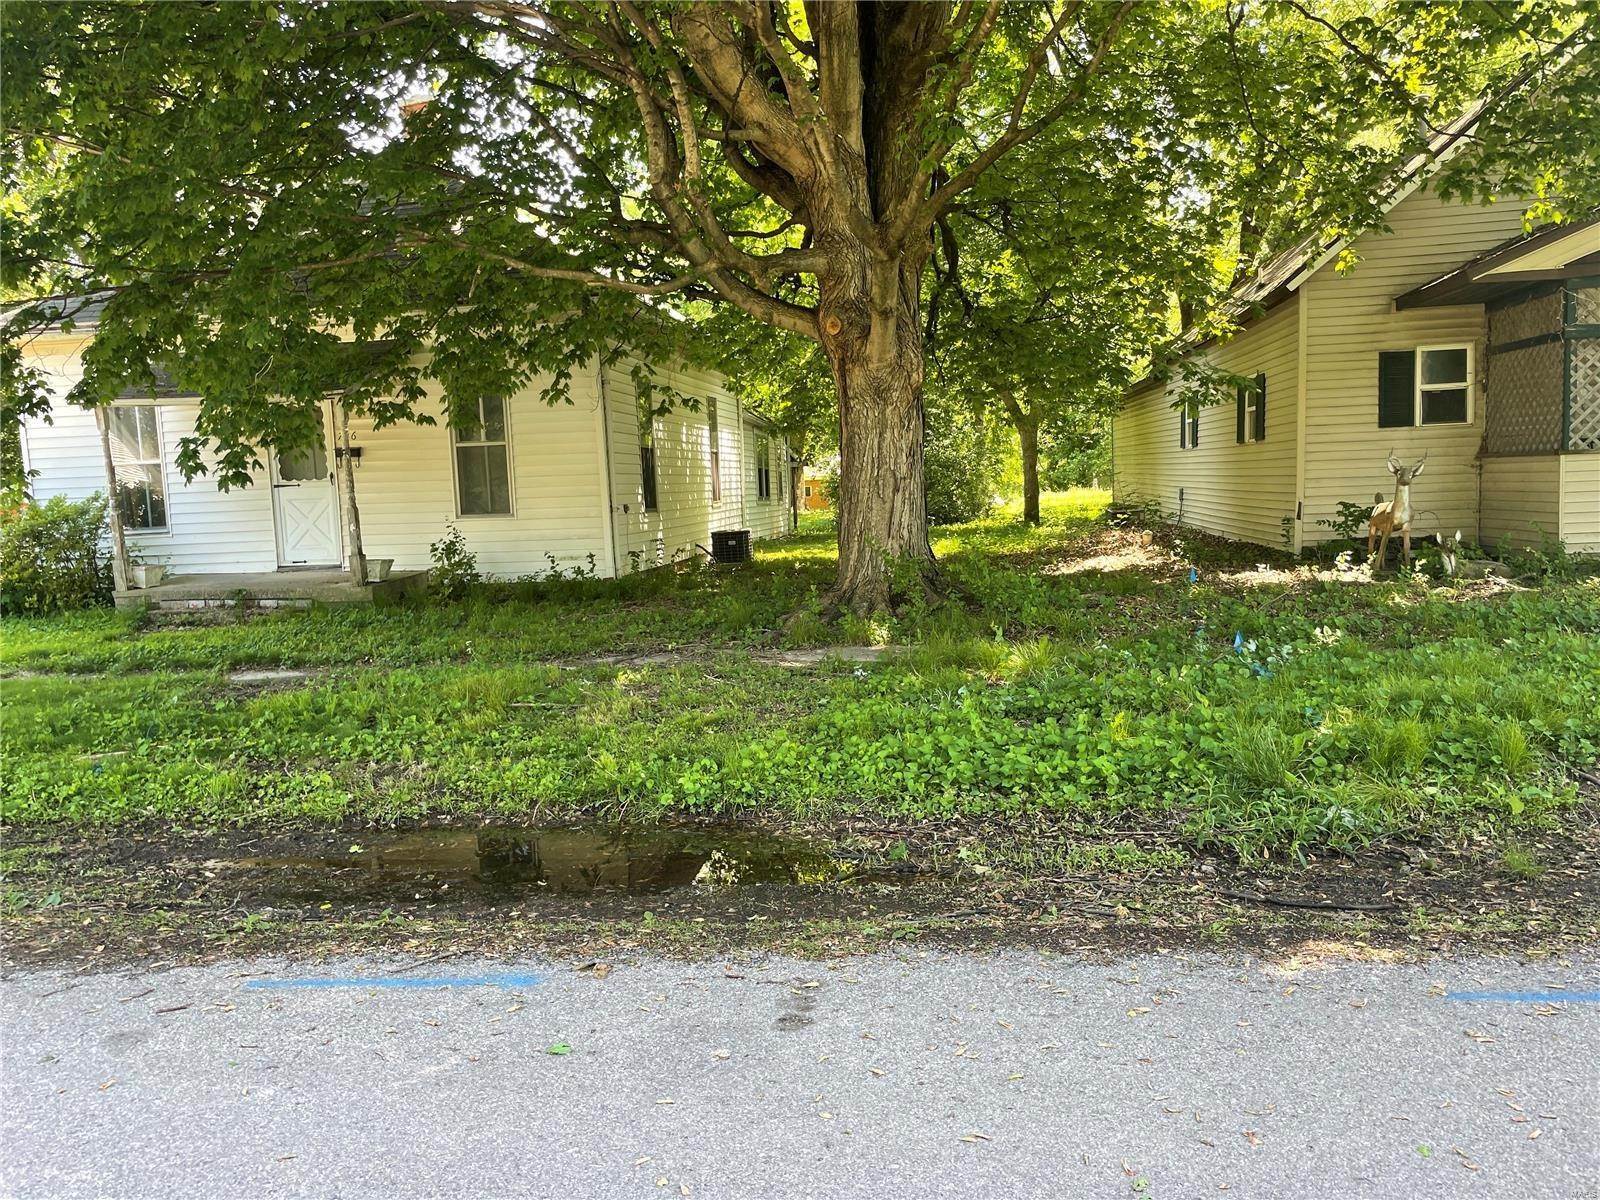 Property for Sale at 726 N Locust Street Litchfield, Illinois 62056 United States